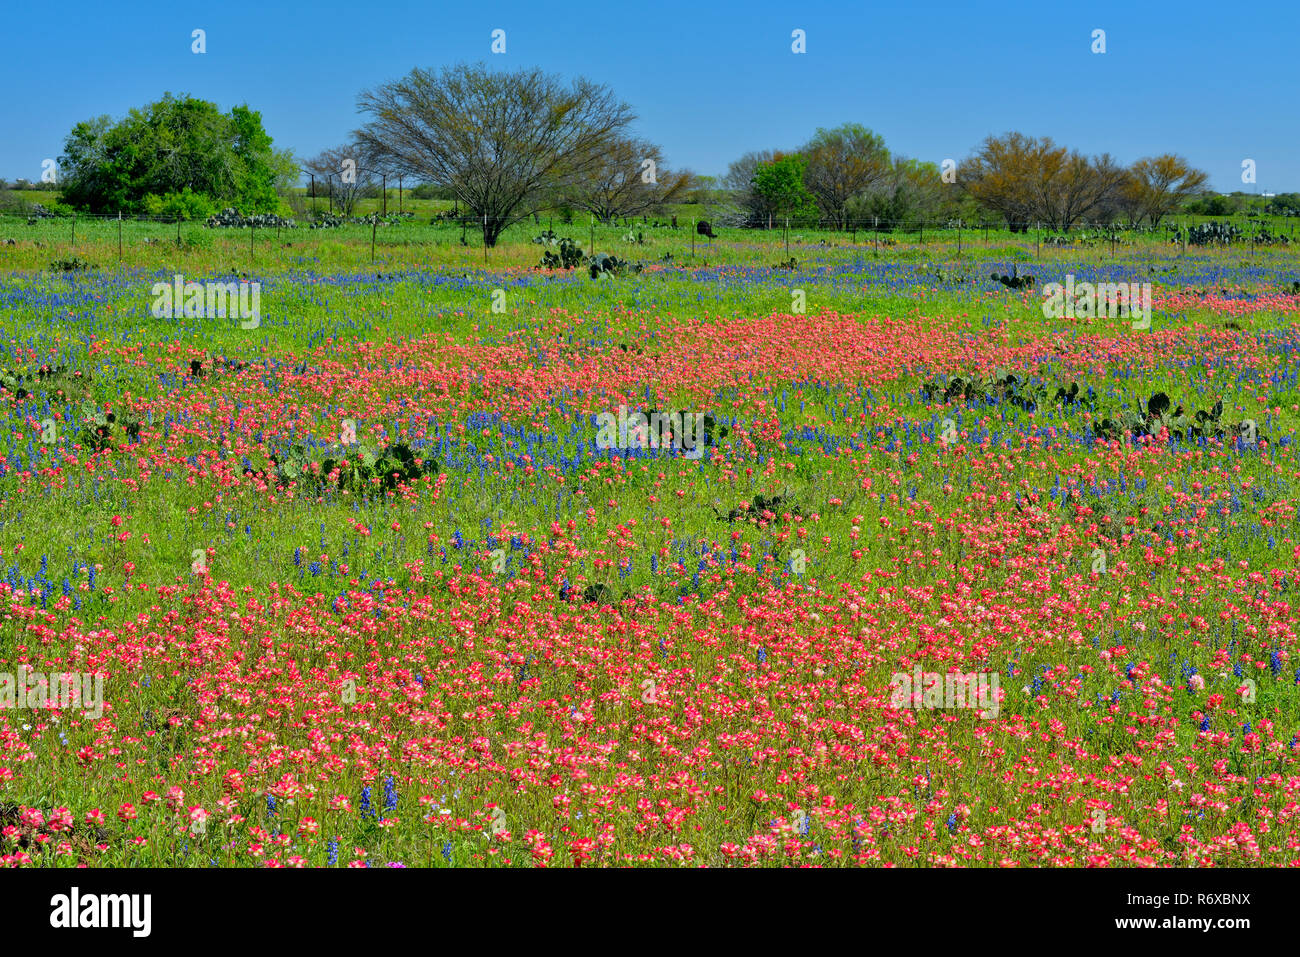 Roadside wildflowers featuring paintbrush, cactus and bluebonnets, Hwy 97 near Stockdale, Texas, USA Stock Photo